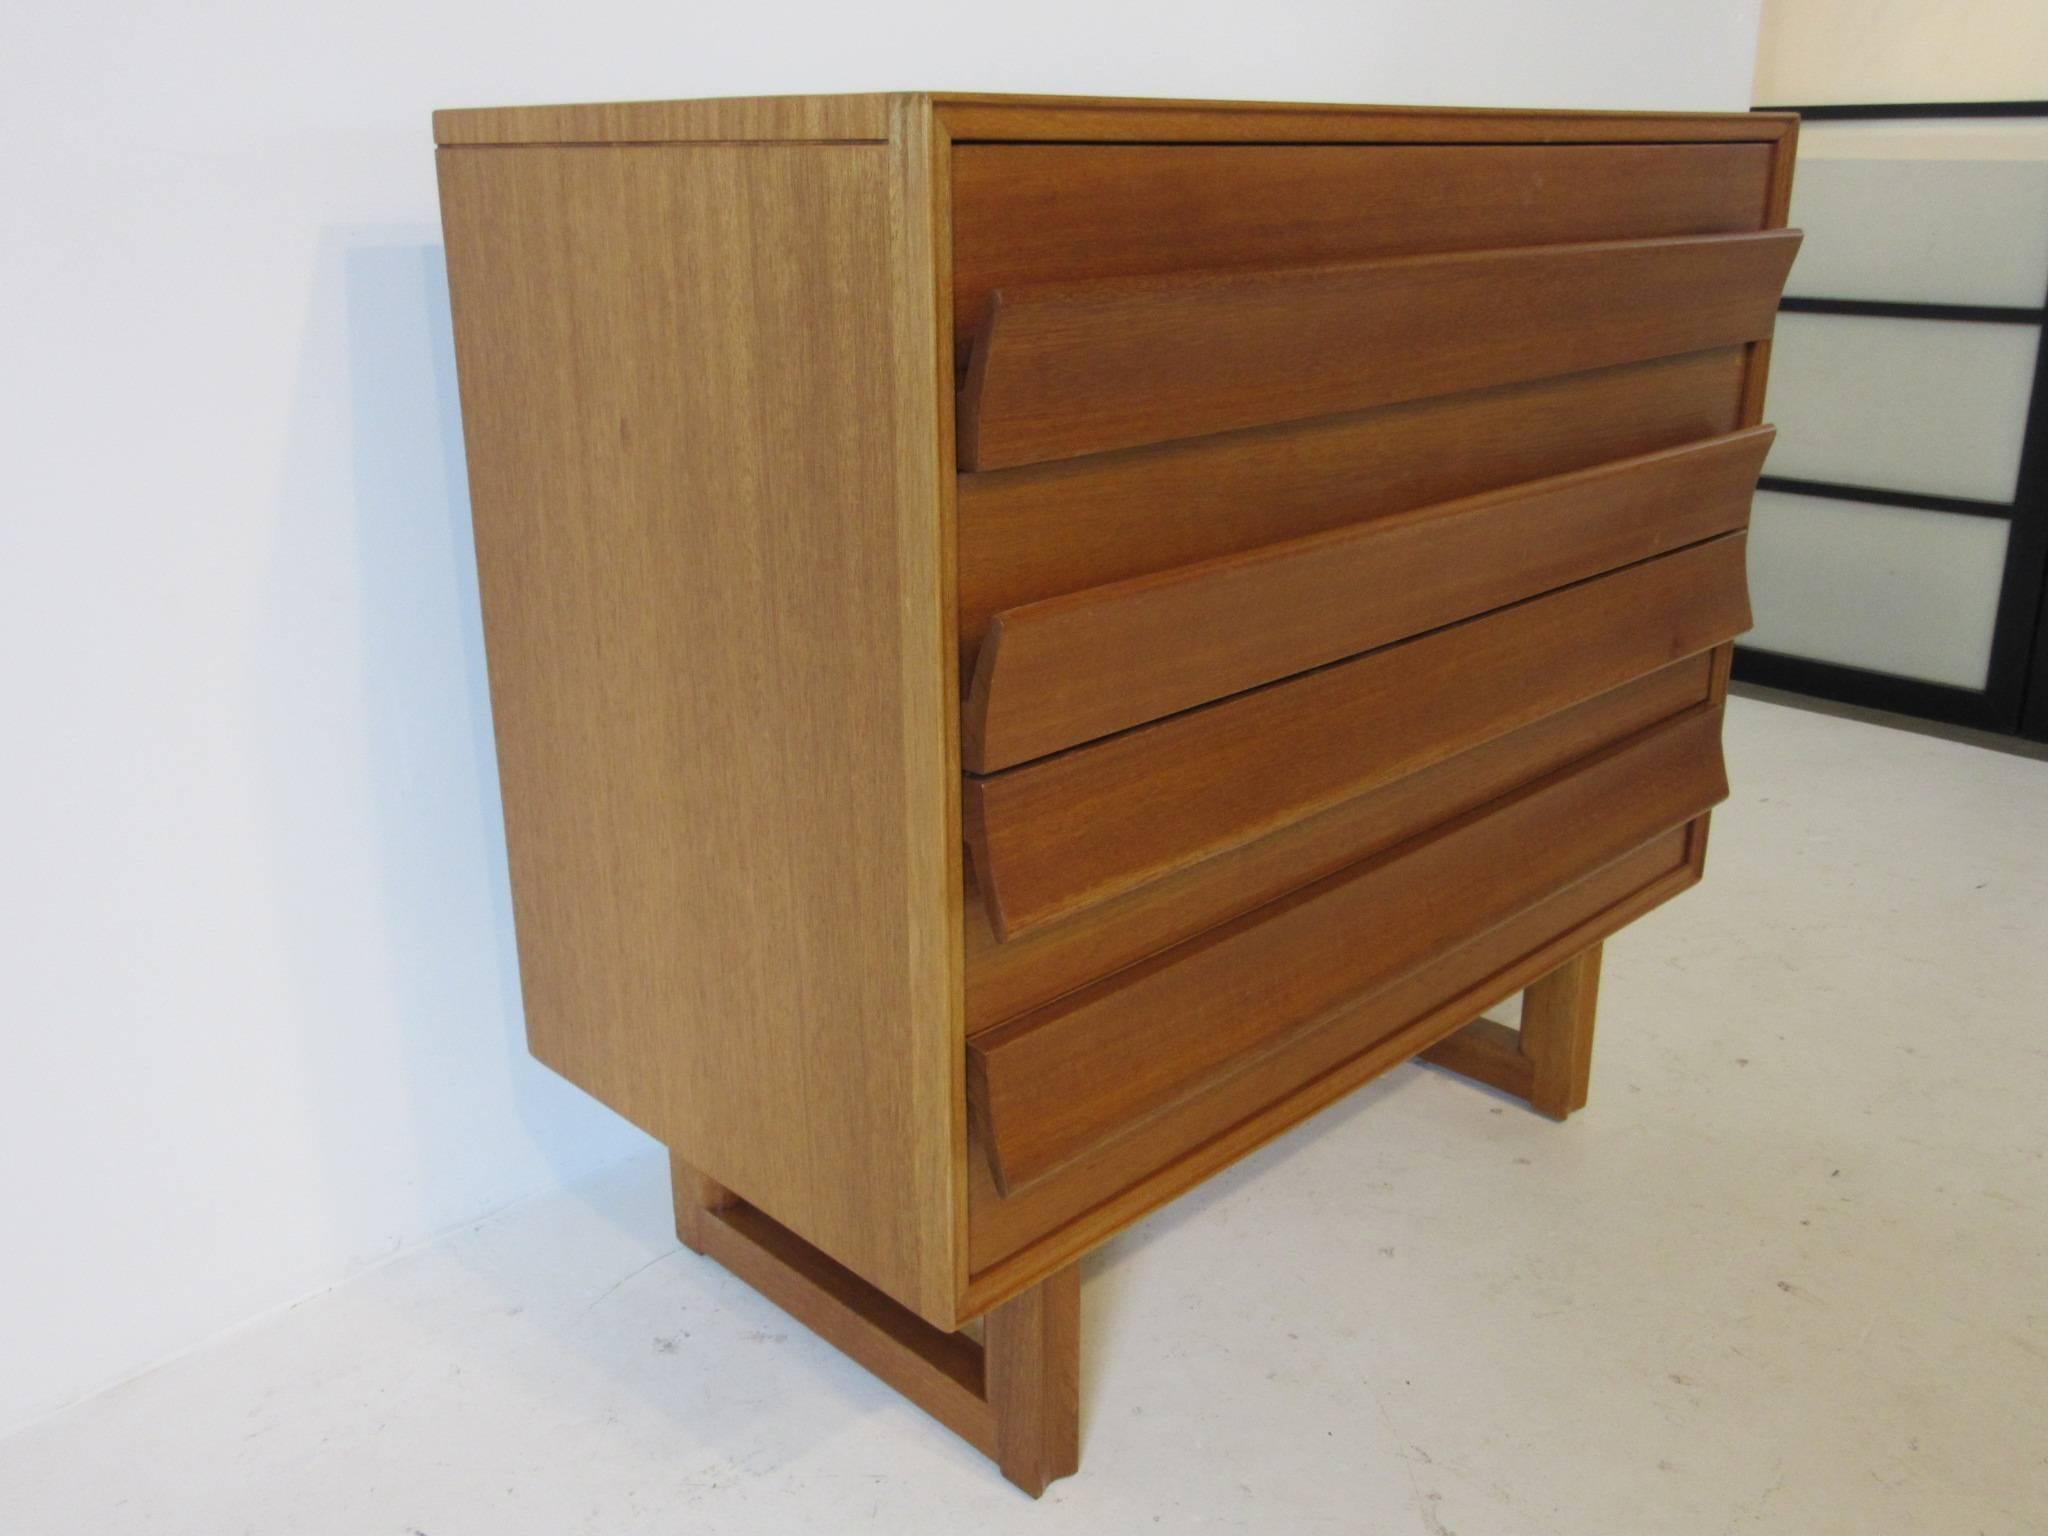 A four-drawer chest with winged pulls and architectural styled base in ribboned Indonesian mahogany, retains the manufactures label to the inside drawer, Paul Laszlo for the Brown Saltman furniture company.